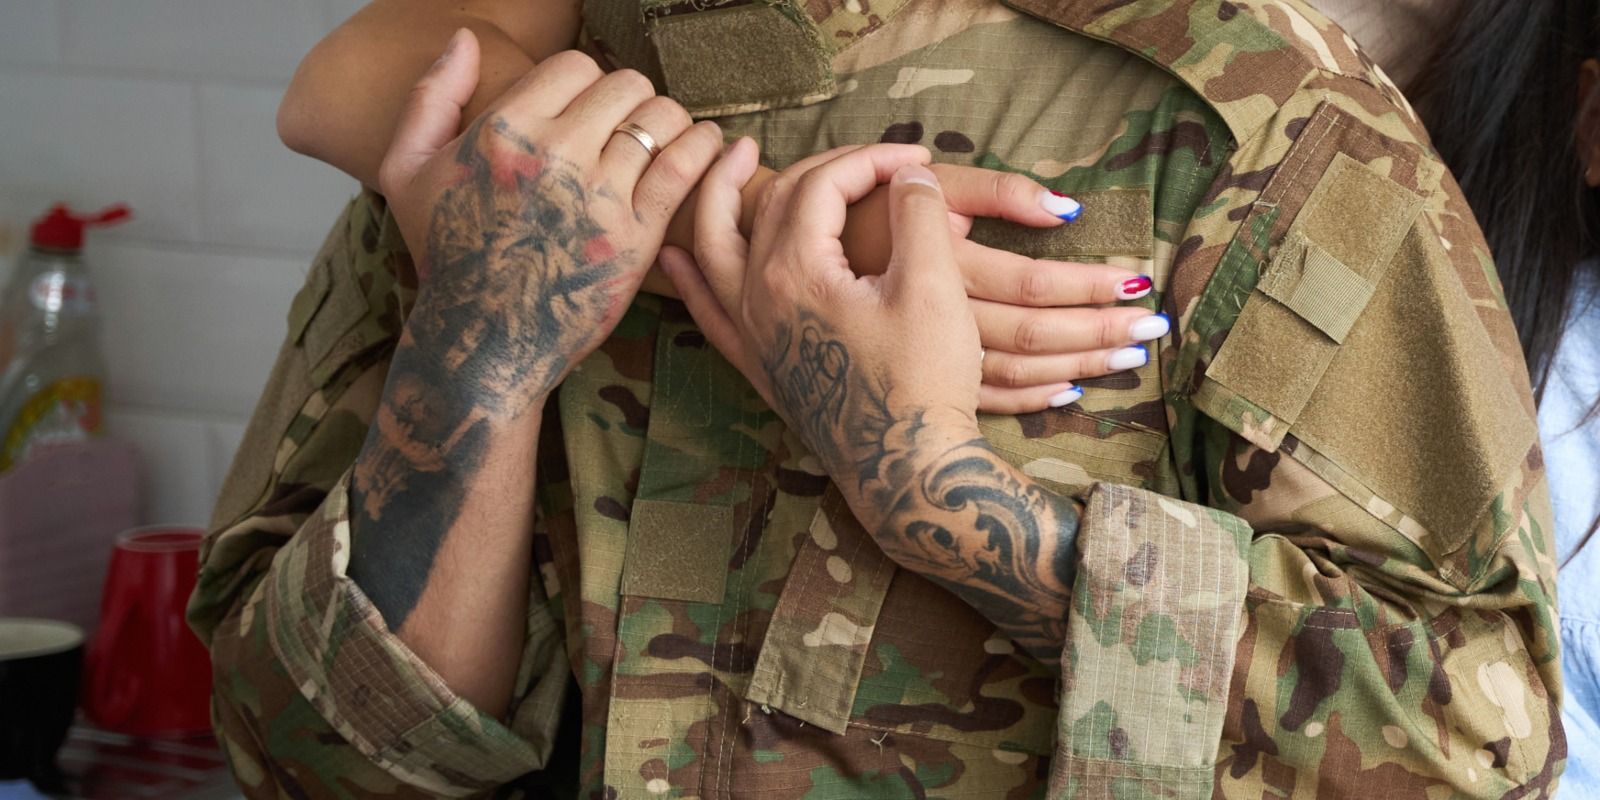 Are hand tattoos allowed in the military